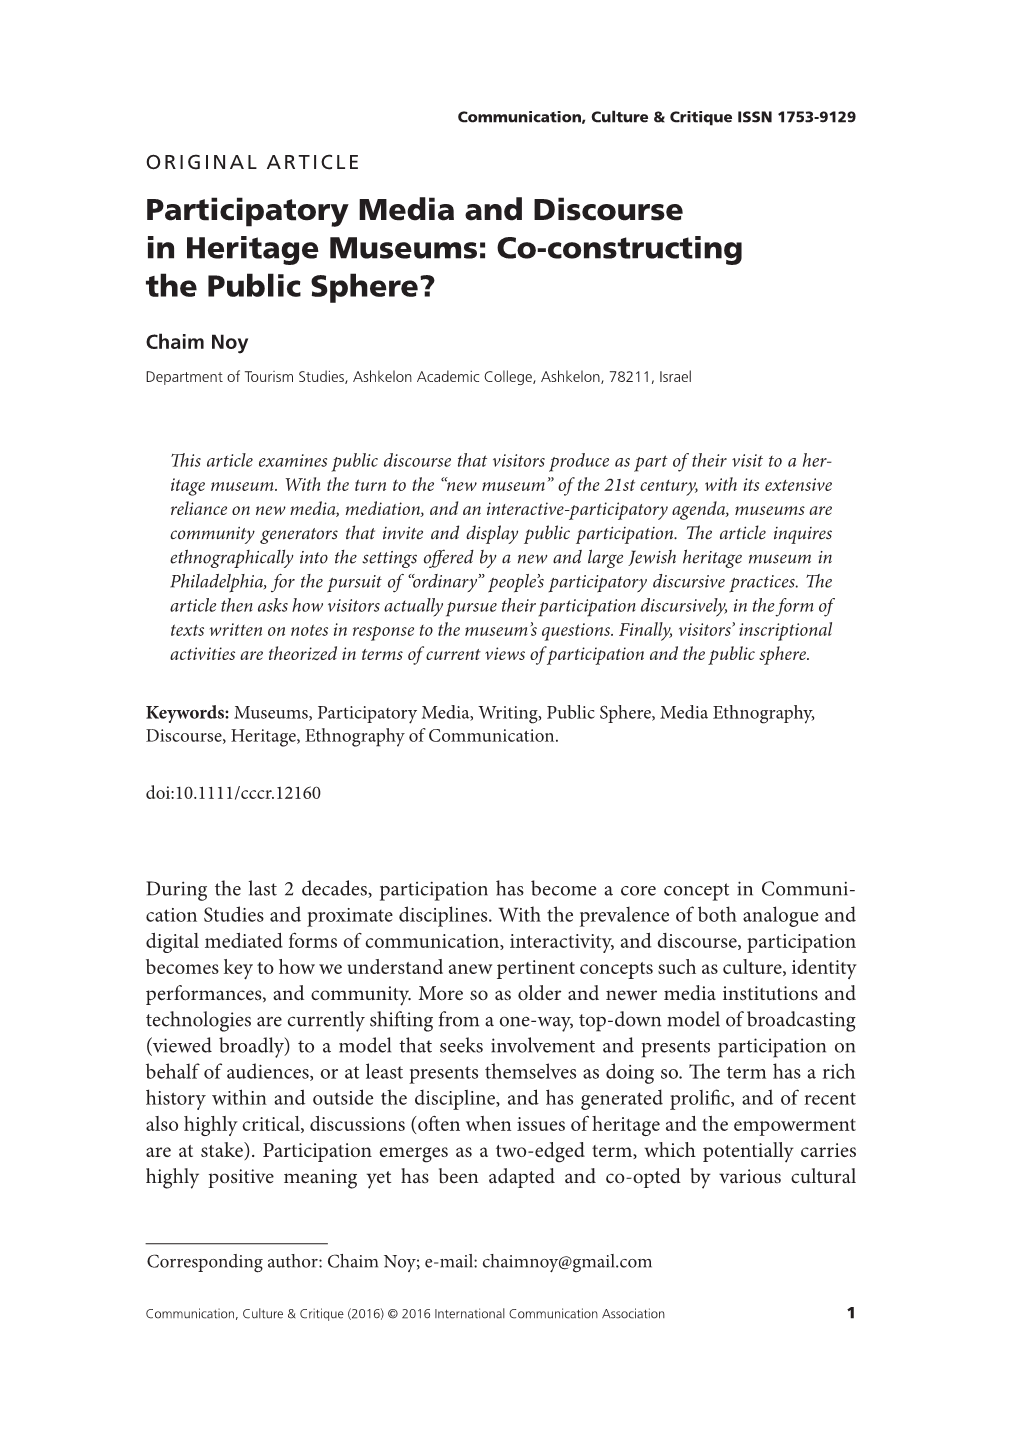 Participatory Media and Discourse in Heritage Museums: Co-Constructing the Public Sphere?